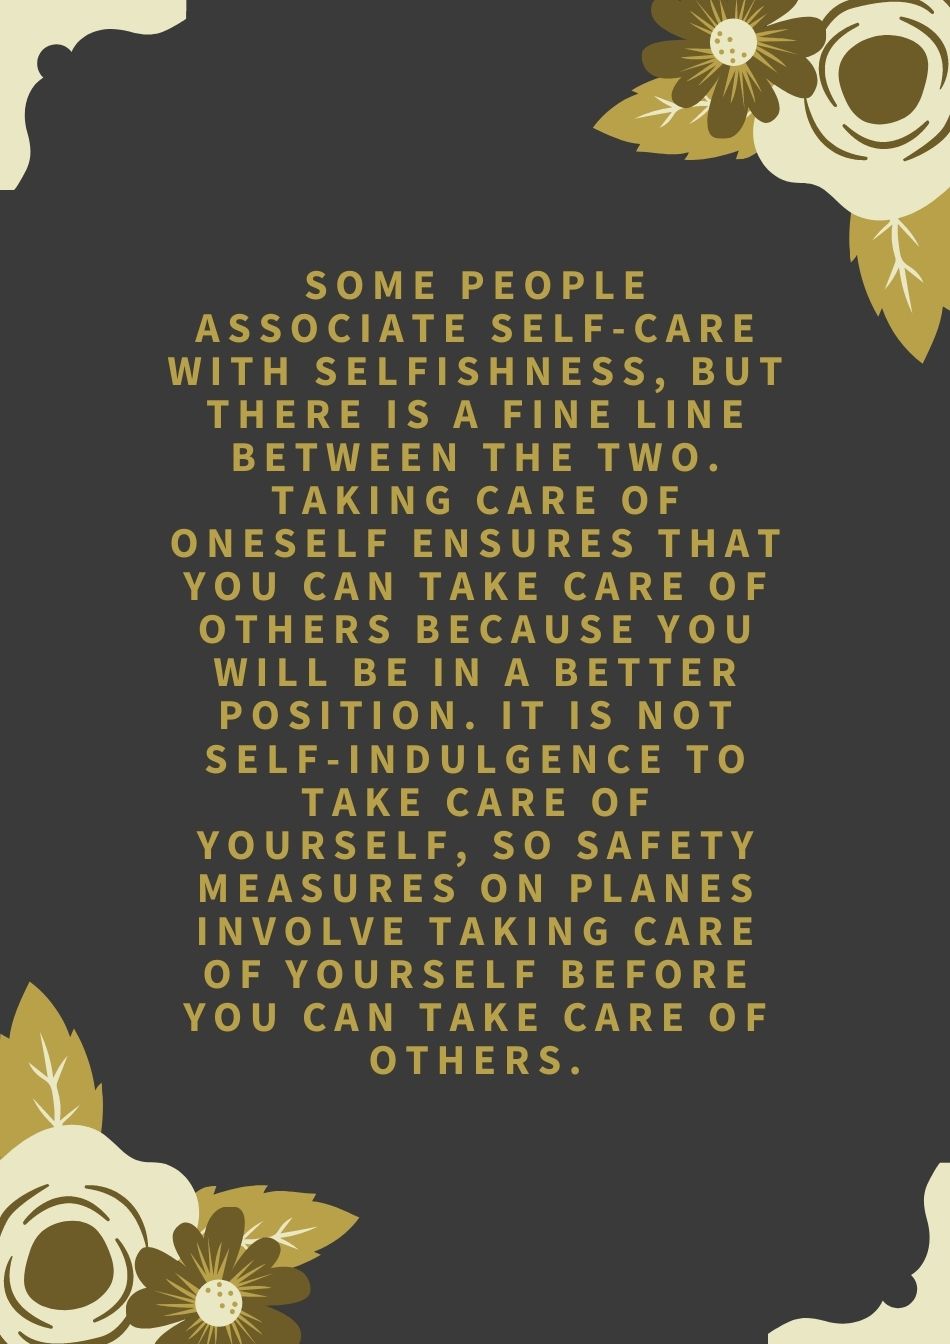 Some people associate self-care with selfishness, but there is a fine line between the two